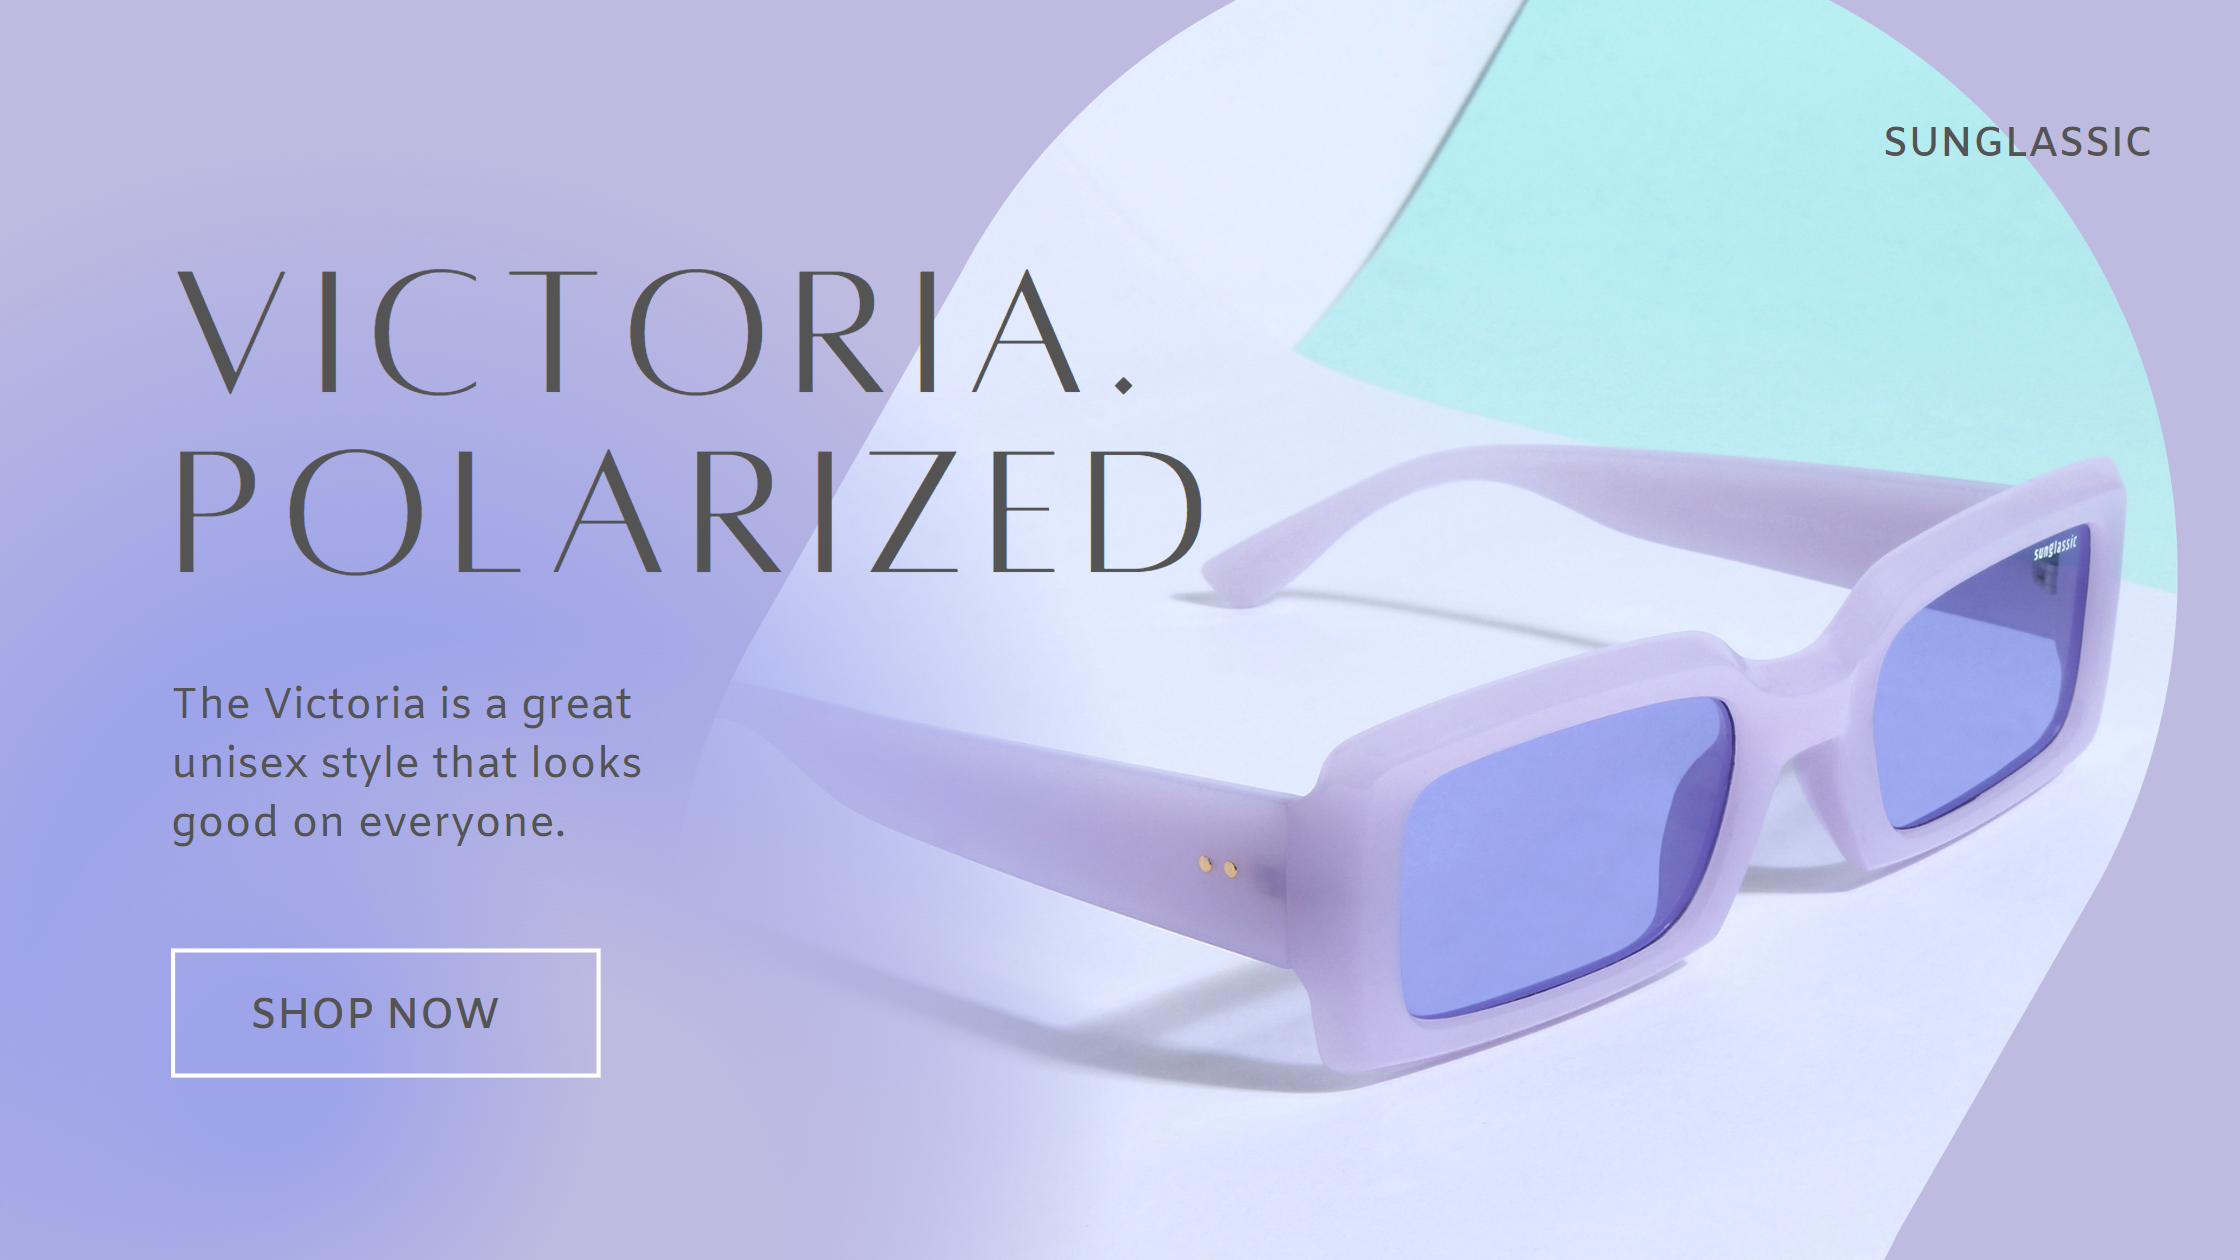 Discover the Benefits of Polarized Lenses with the Victoria from Sunglassic